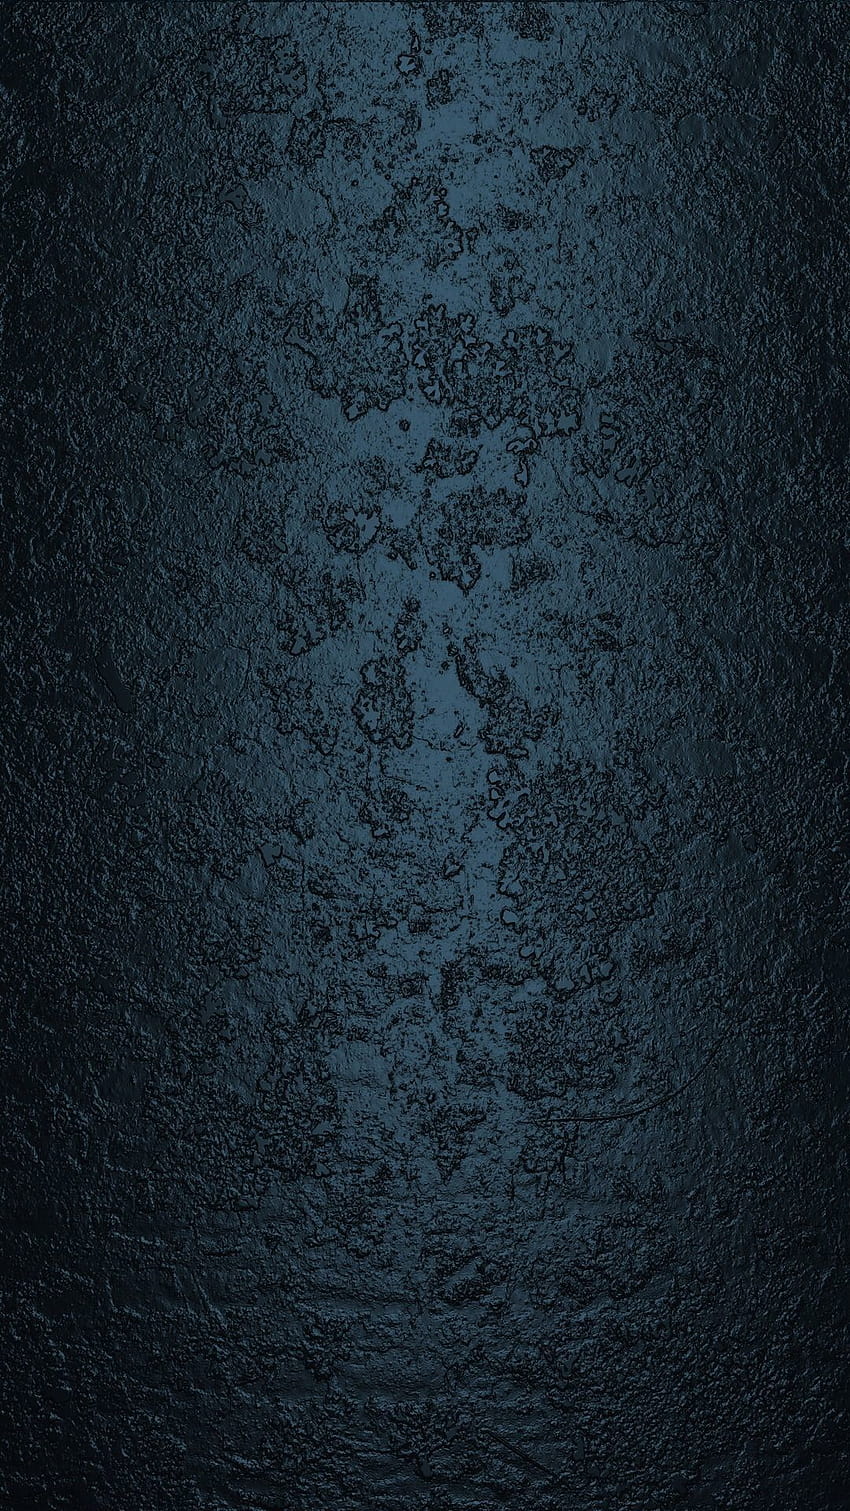 1366x768px, 720P Free download | High Resolution Navy Blue Texture ...